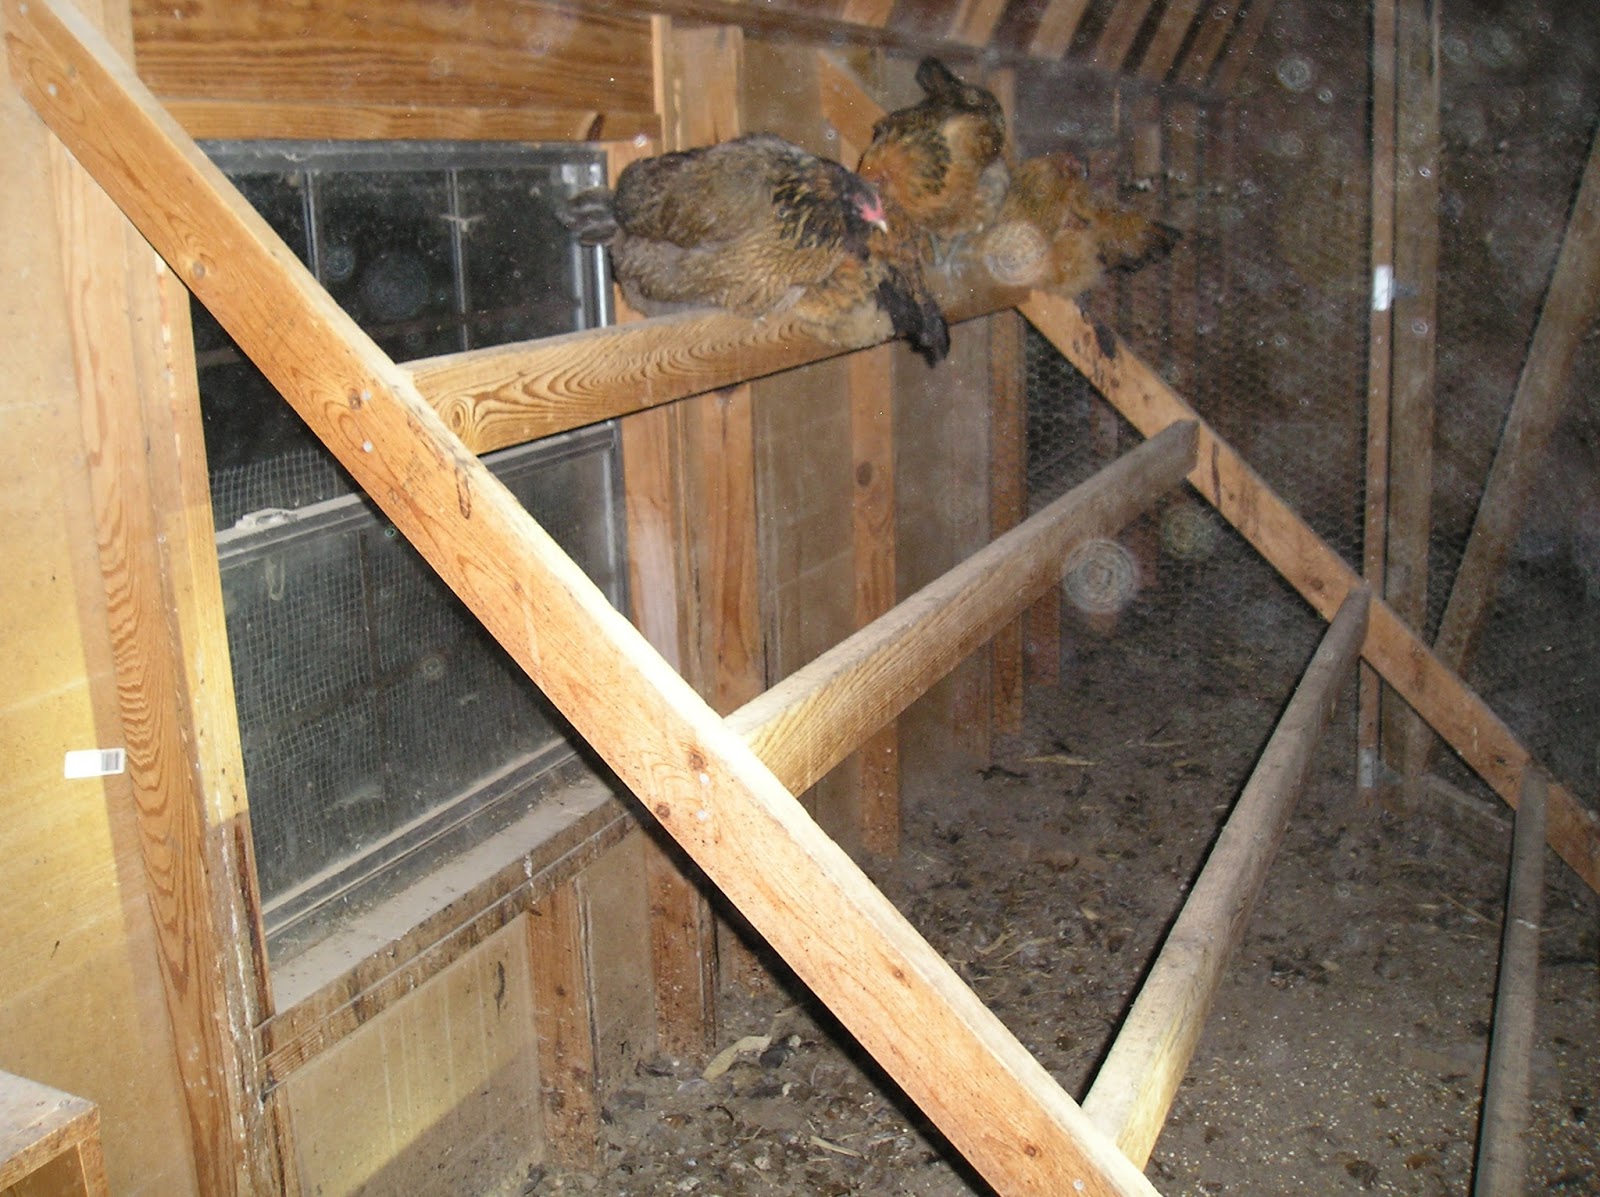 Thoughts from Frank and Fern: Chicken Housing and Needs